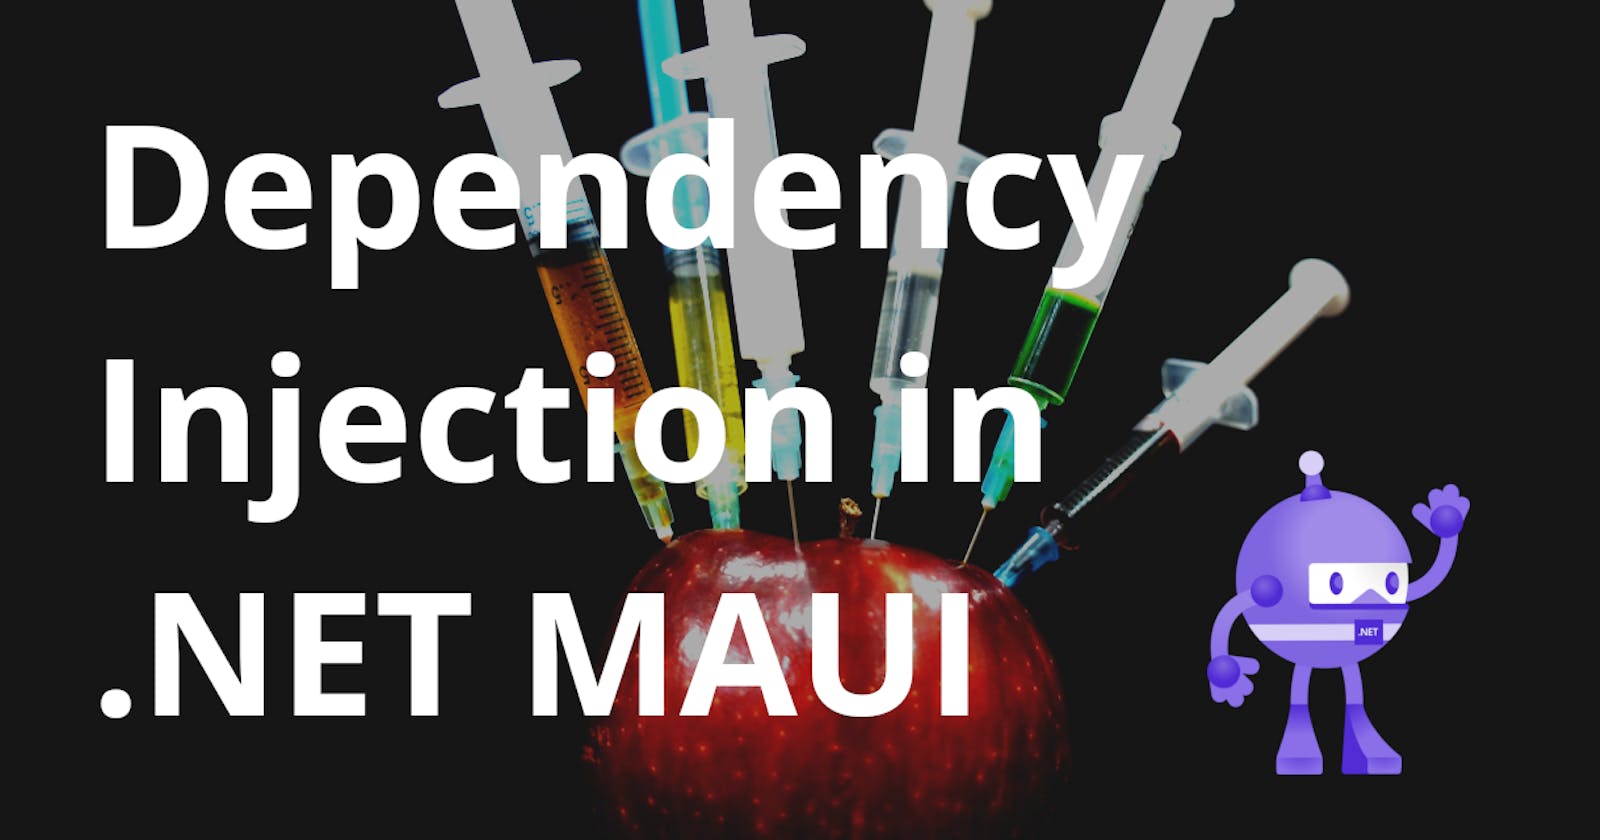 Are you using Dependency Injection in your .NET MAUI app yet?